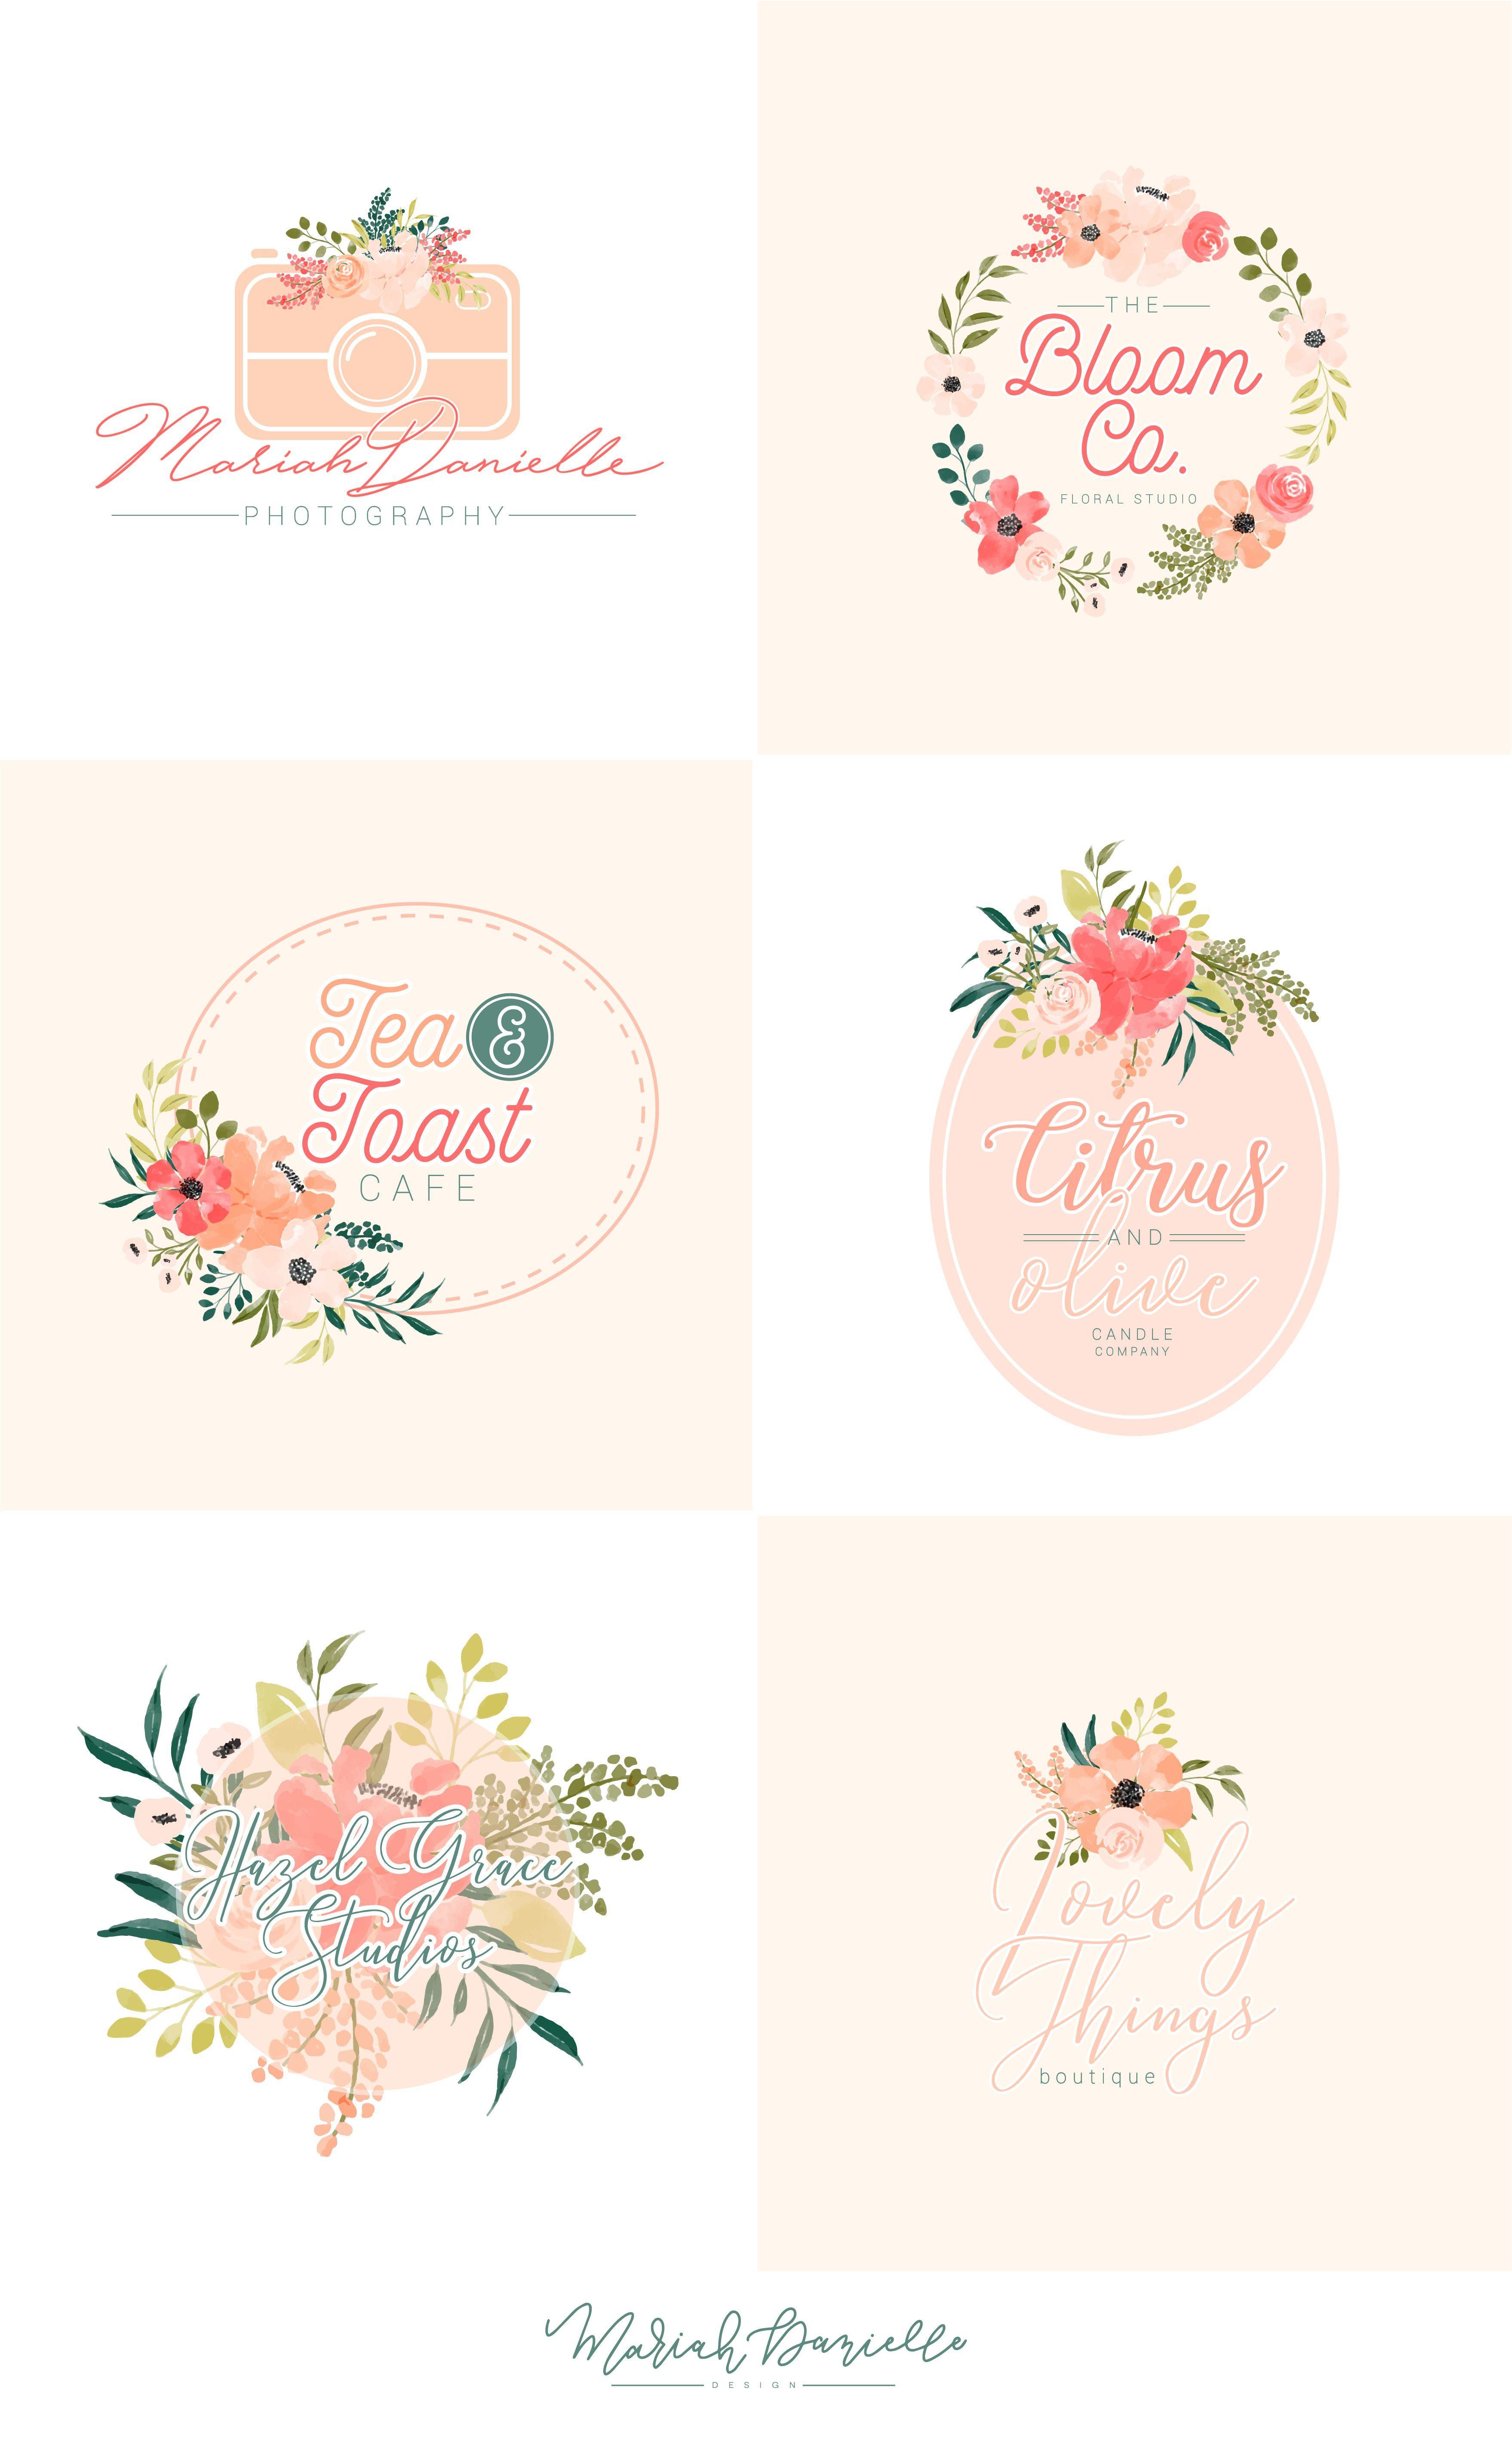 Red and Peach Logo - Peach & Posey Floral Premade Logos - Illustrations | Hand Drawn ...